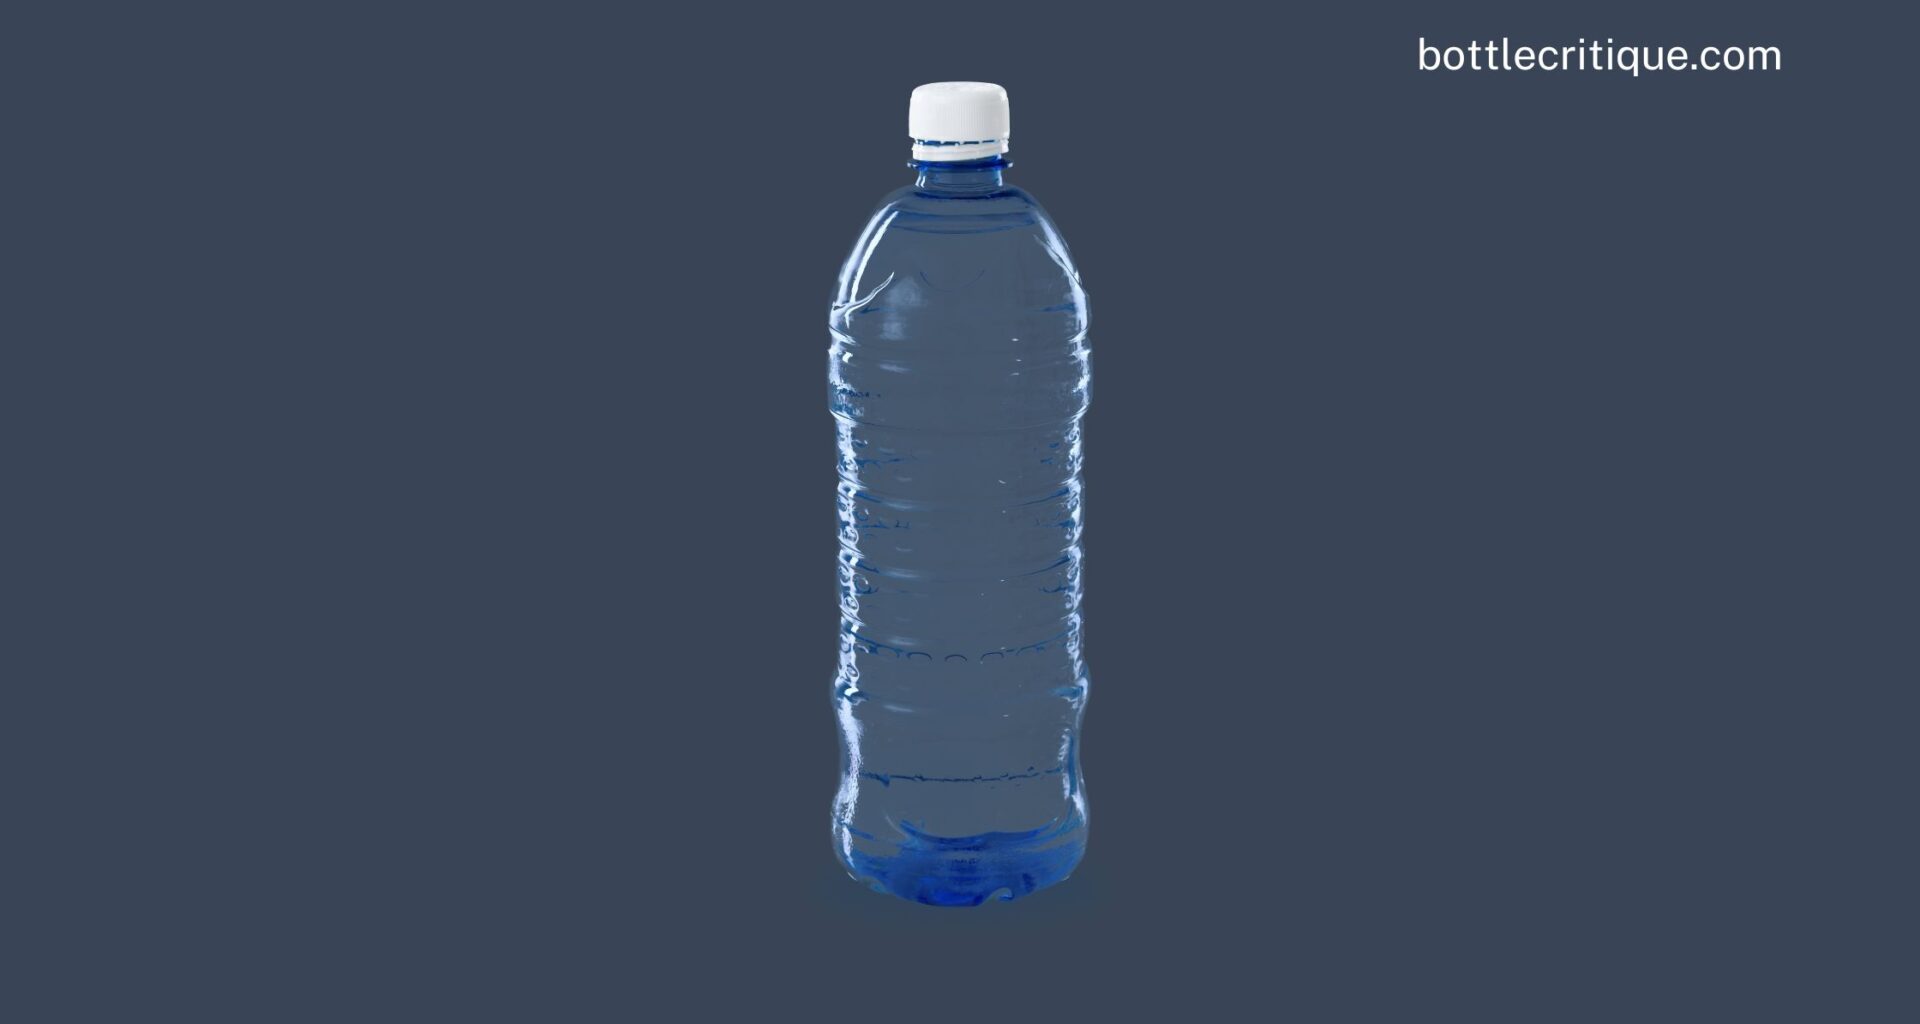 How to Remove Smell from Plastic Water Bottle?